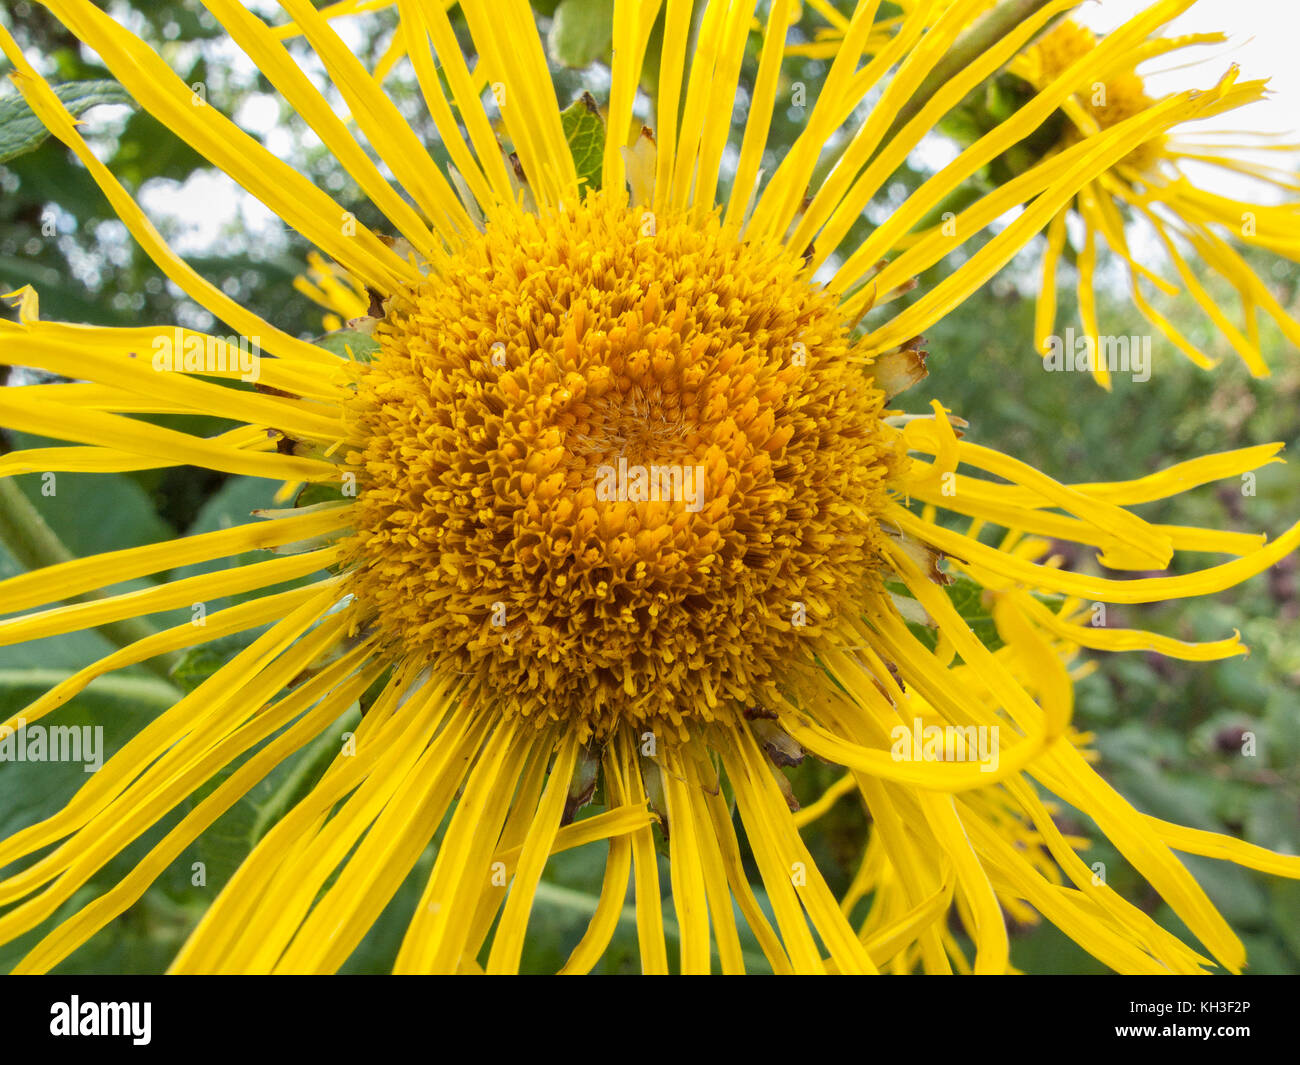 Yellow flower of the herbal / medicinal plant Elecampane / Inula helenium. Once used in herbal remedies, particularly for coughs & chest complaints. Stock Photo